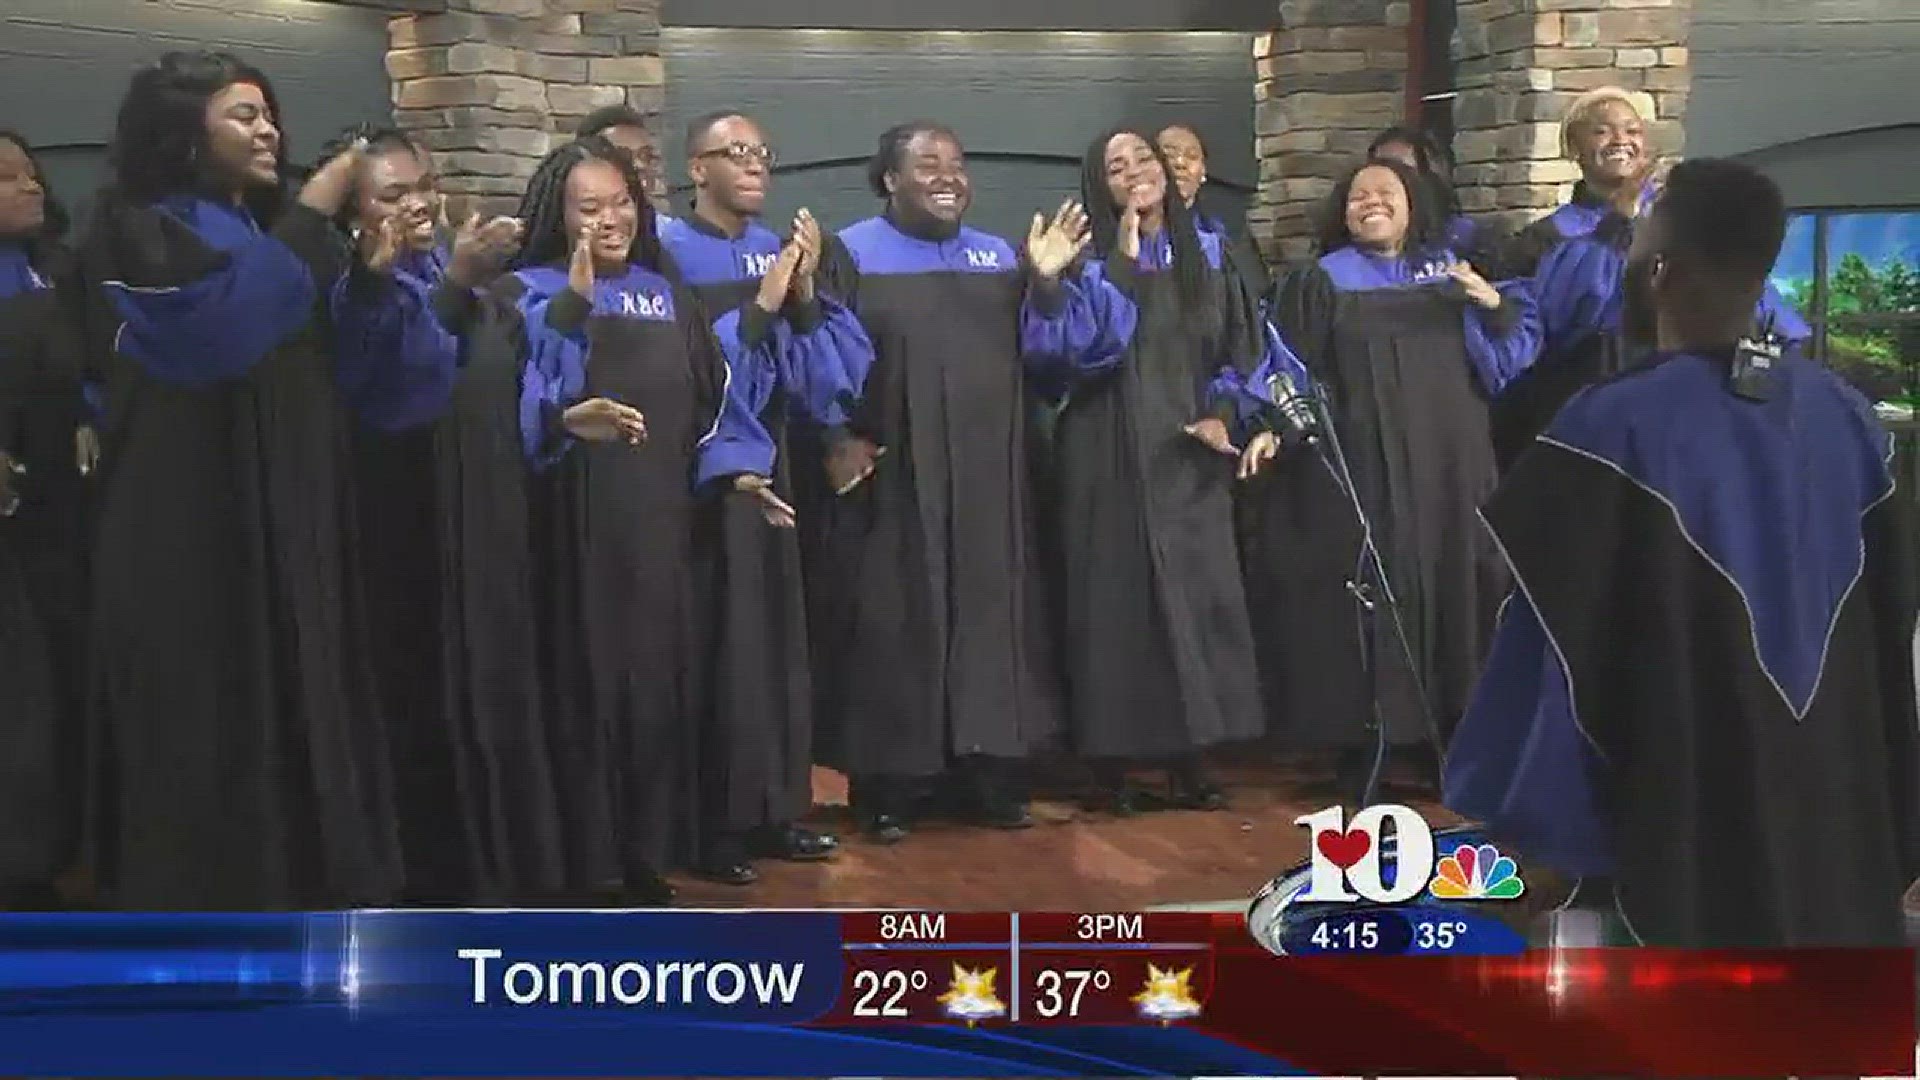 Members of the award-winning Howard Gospel Choir based in Washington D.C. perform on Live at Five at Four as part of their Spring Break tour.